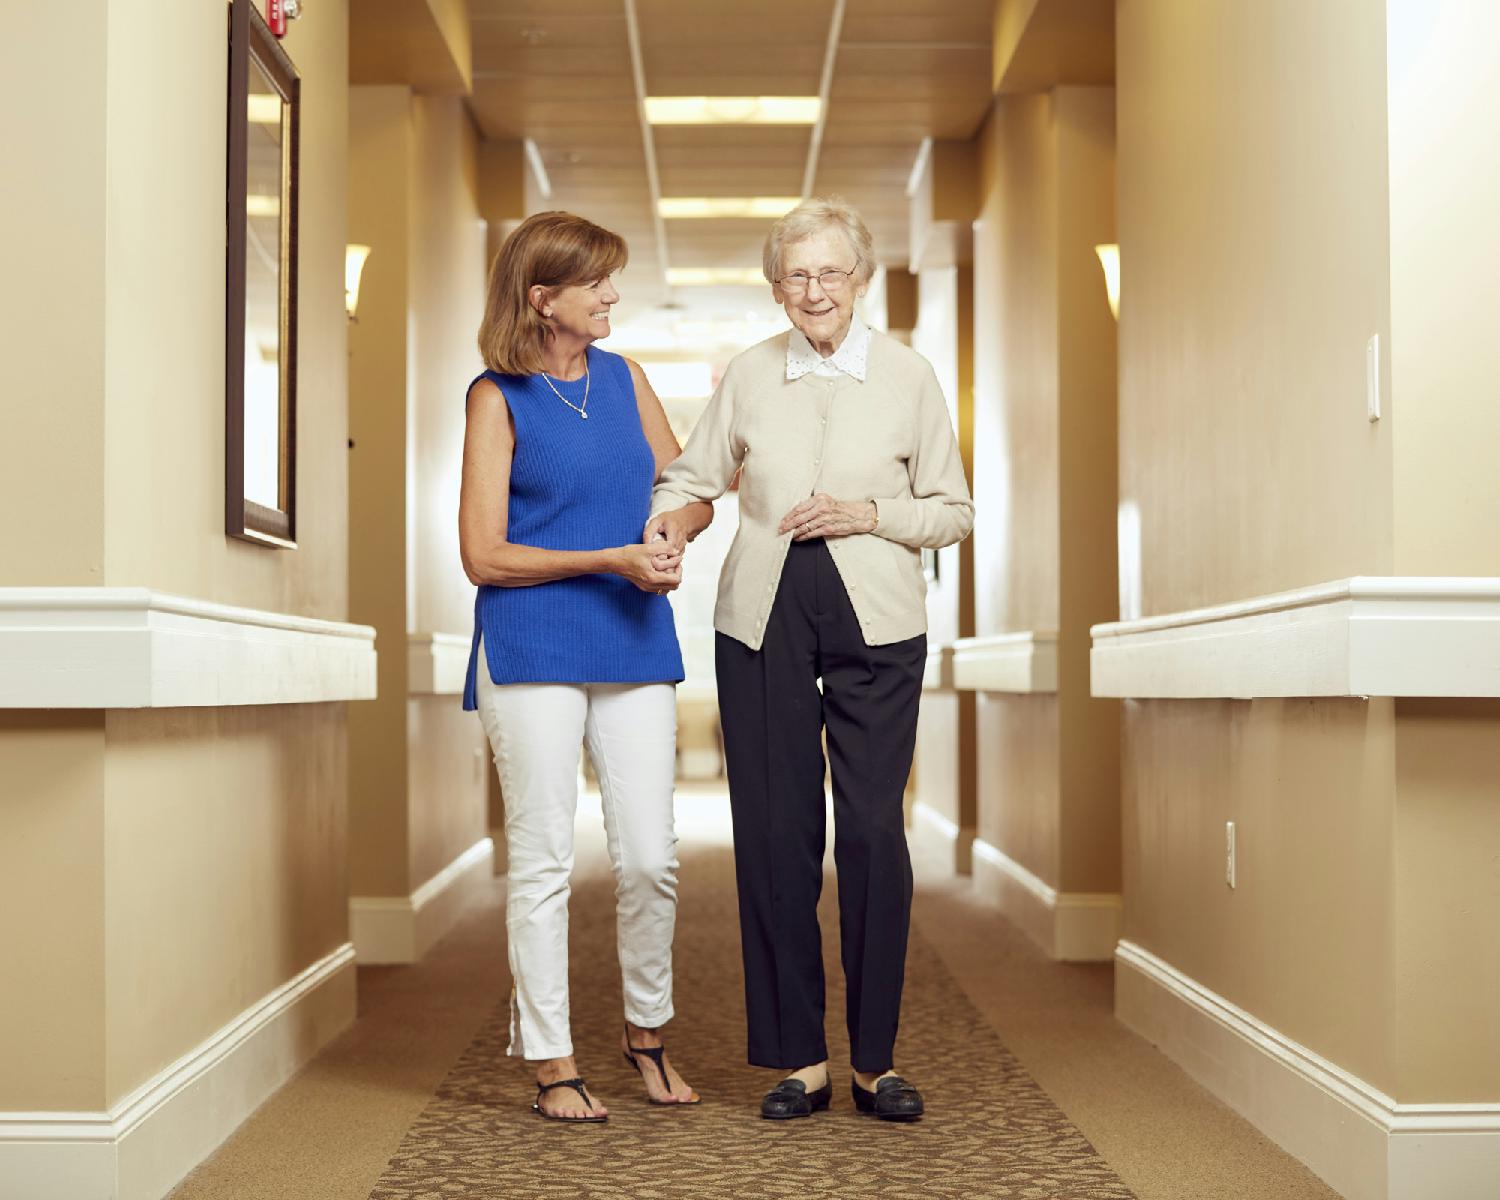 A caregiver walks down the hallway with a resident.